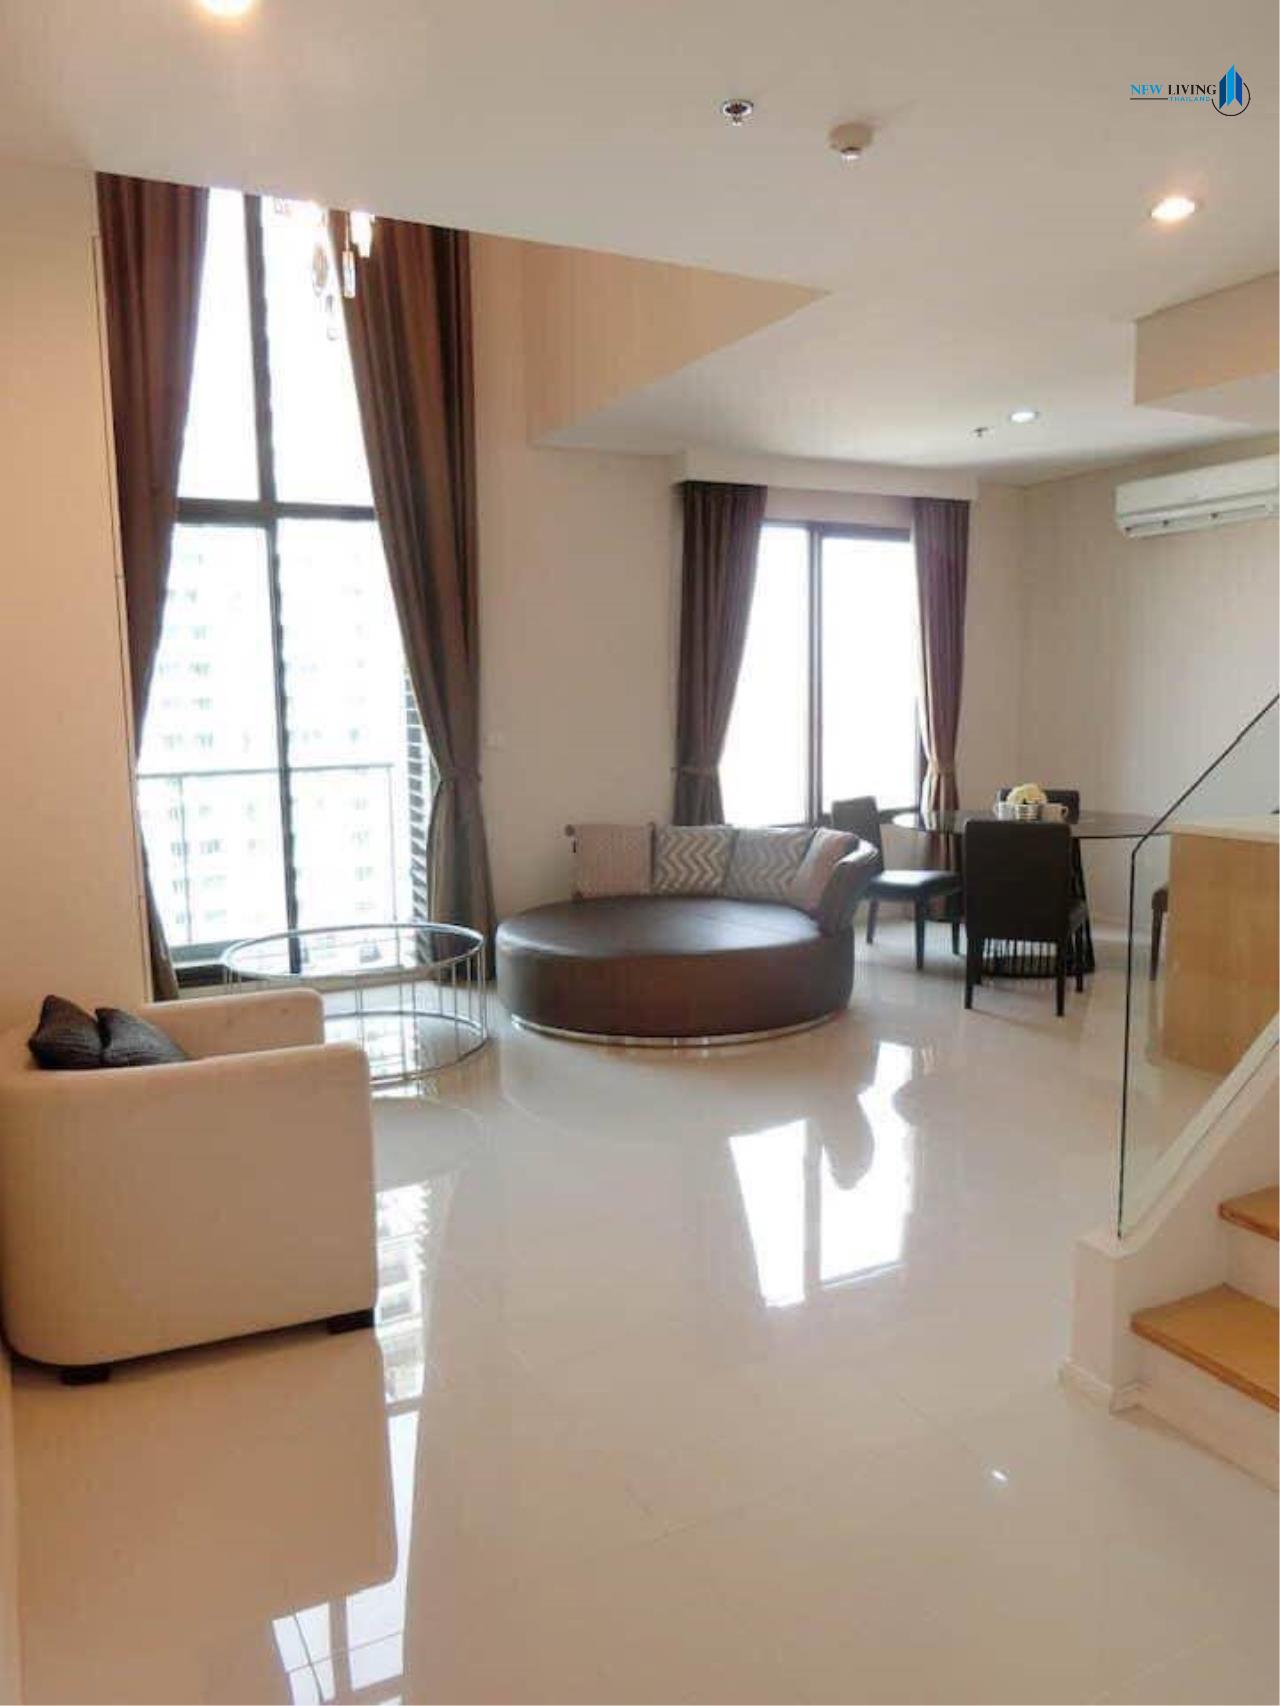 New Living Thailand Agency's *** Urgent rent !!! Villa asoke 1 bedroom Duplex 80 sq m, fully furnished, beautiful room, ready to move in **** 1